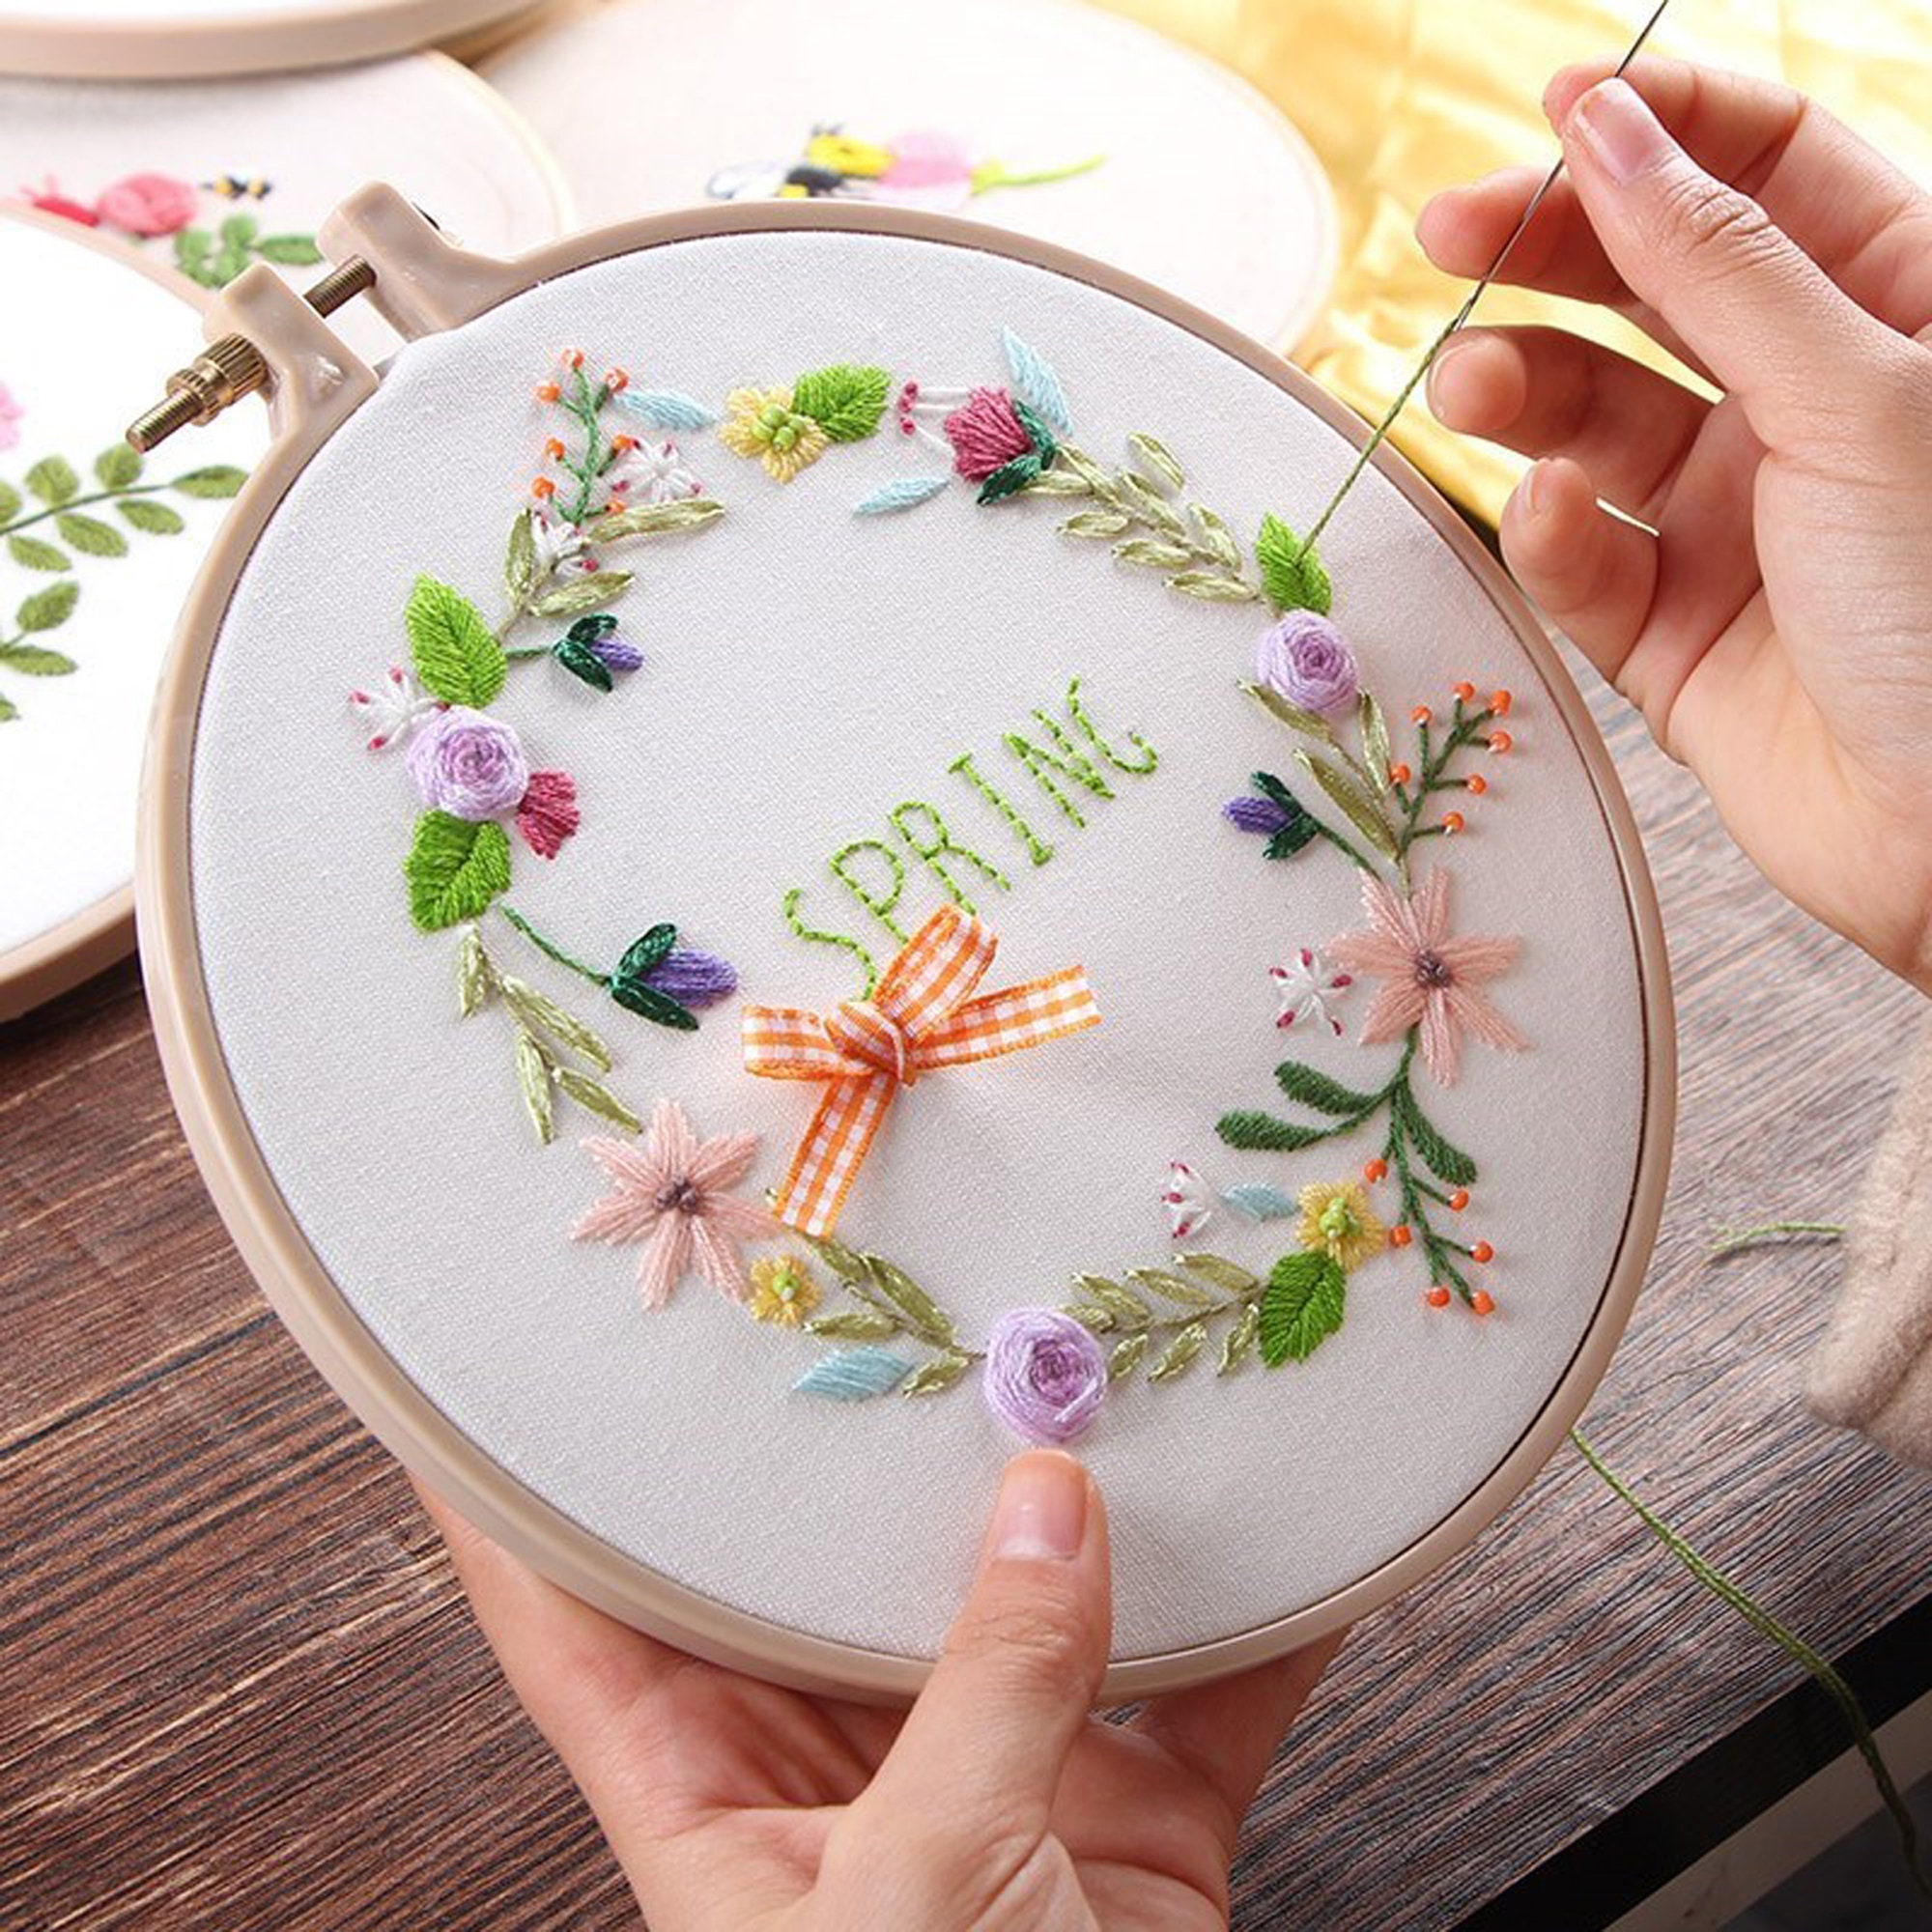 Flower Embroidery Kit for Beginners with Pattern and Instructions, Cross  Stitch Set, Make your spring embroidery pieces. Green plants are the